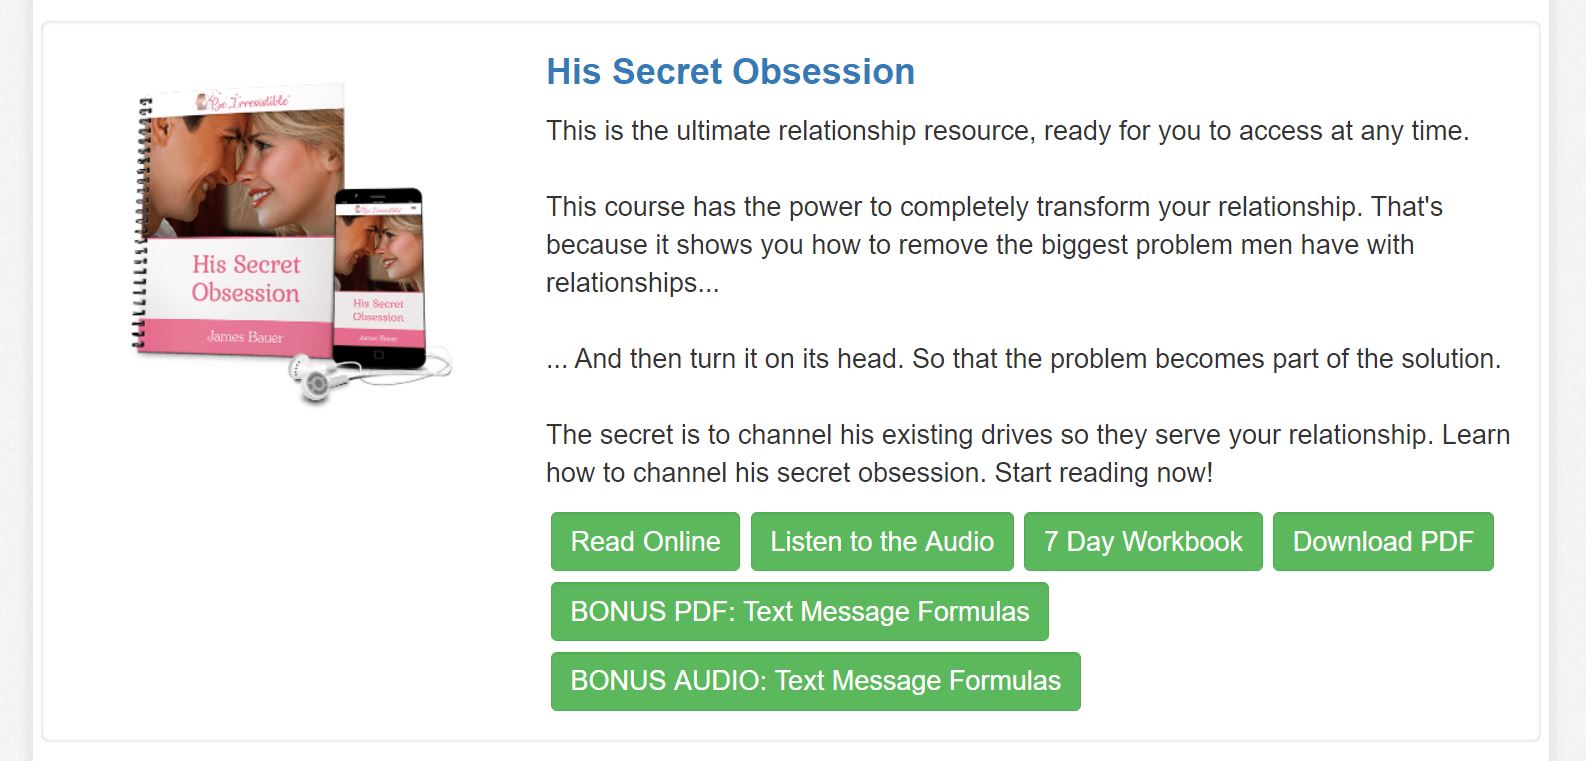 How to start With His Secret Obsession Review